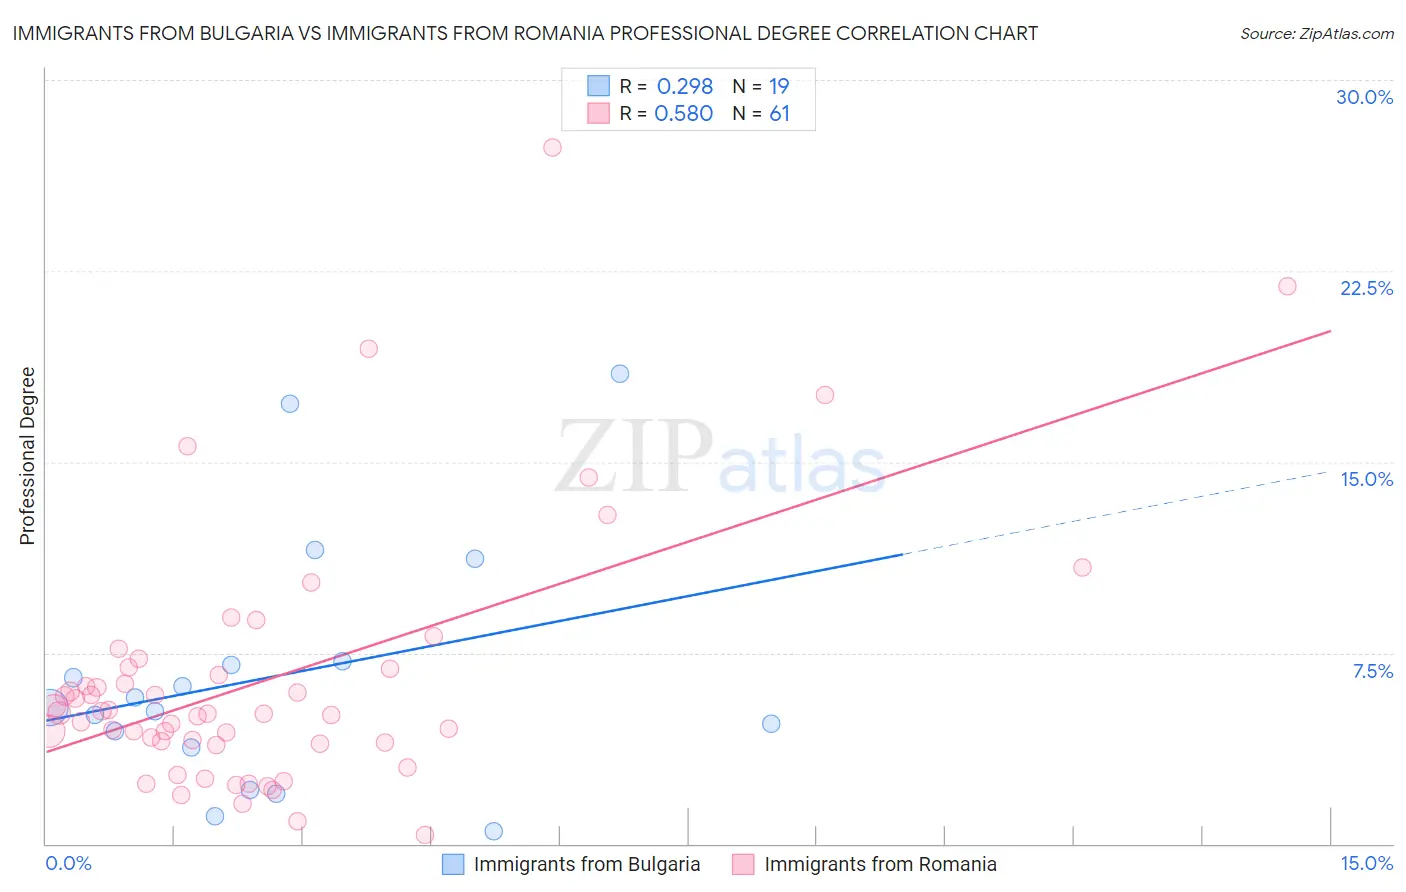 Immigrants from Bulgaria vs Immigrants from Romania Professional Degree